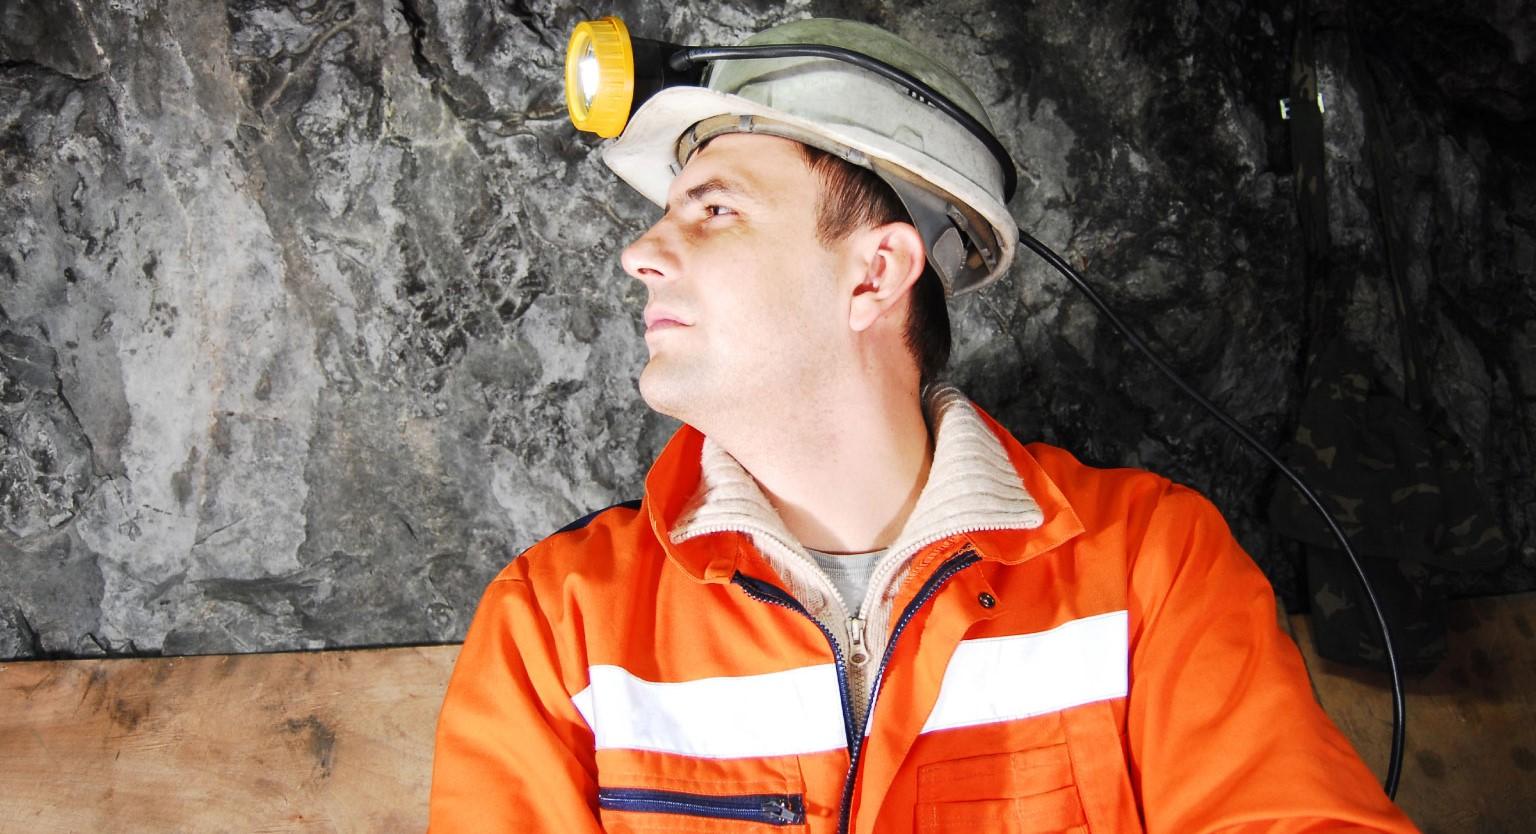 Underground mine worker wearing an orange high visibility shirt and a white hard hat with a headlamp.